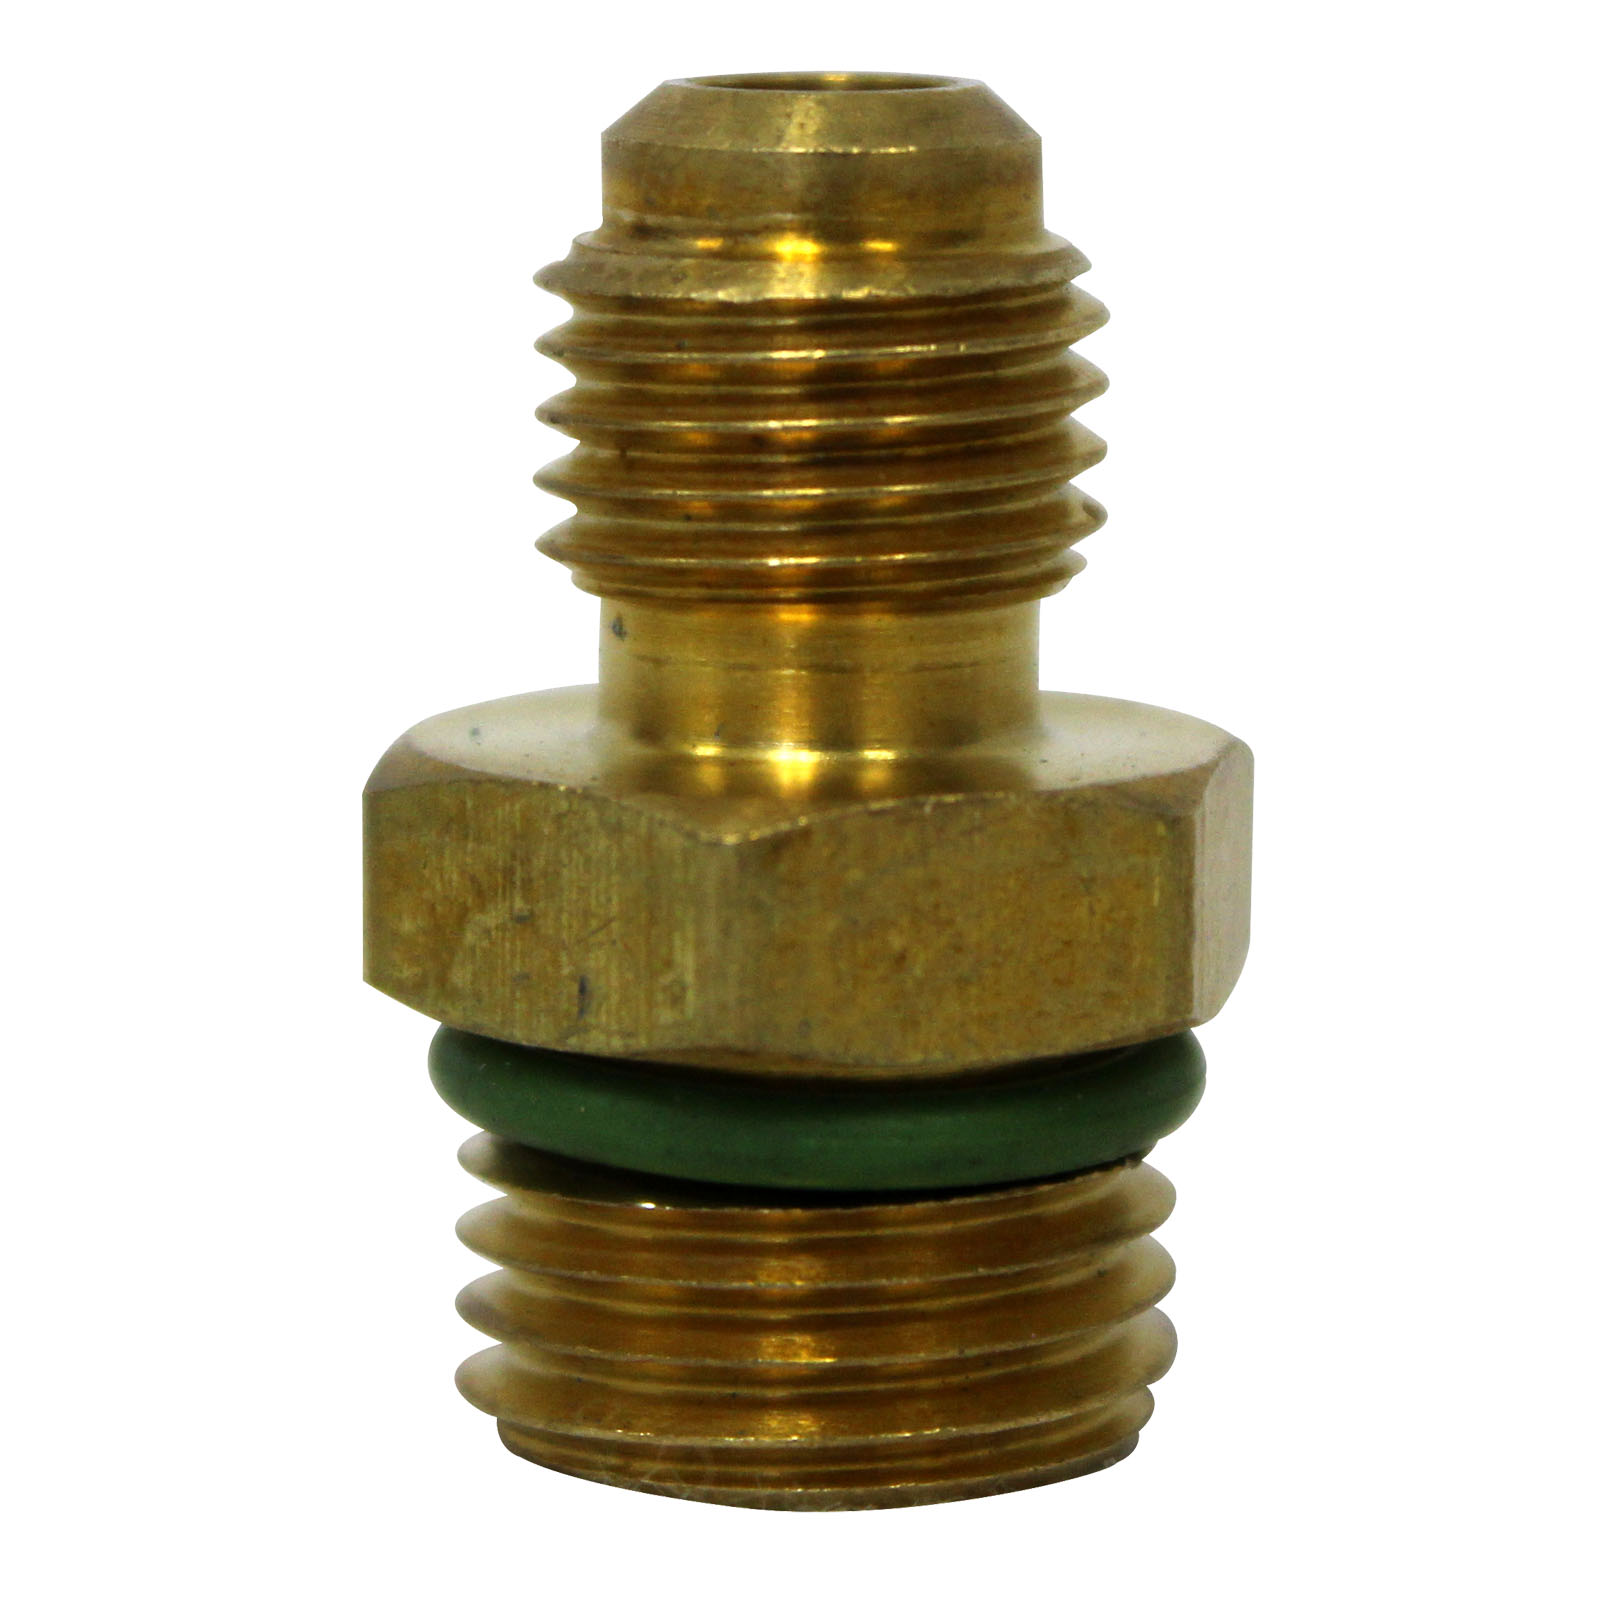 14mm-M x M12 x 1.75-M Connector